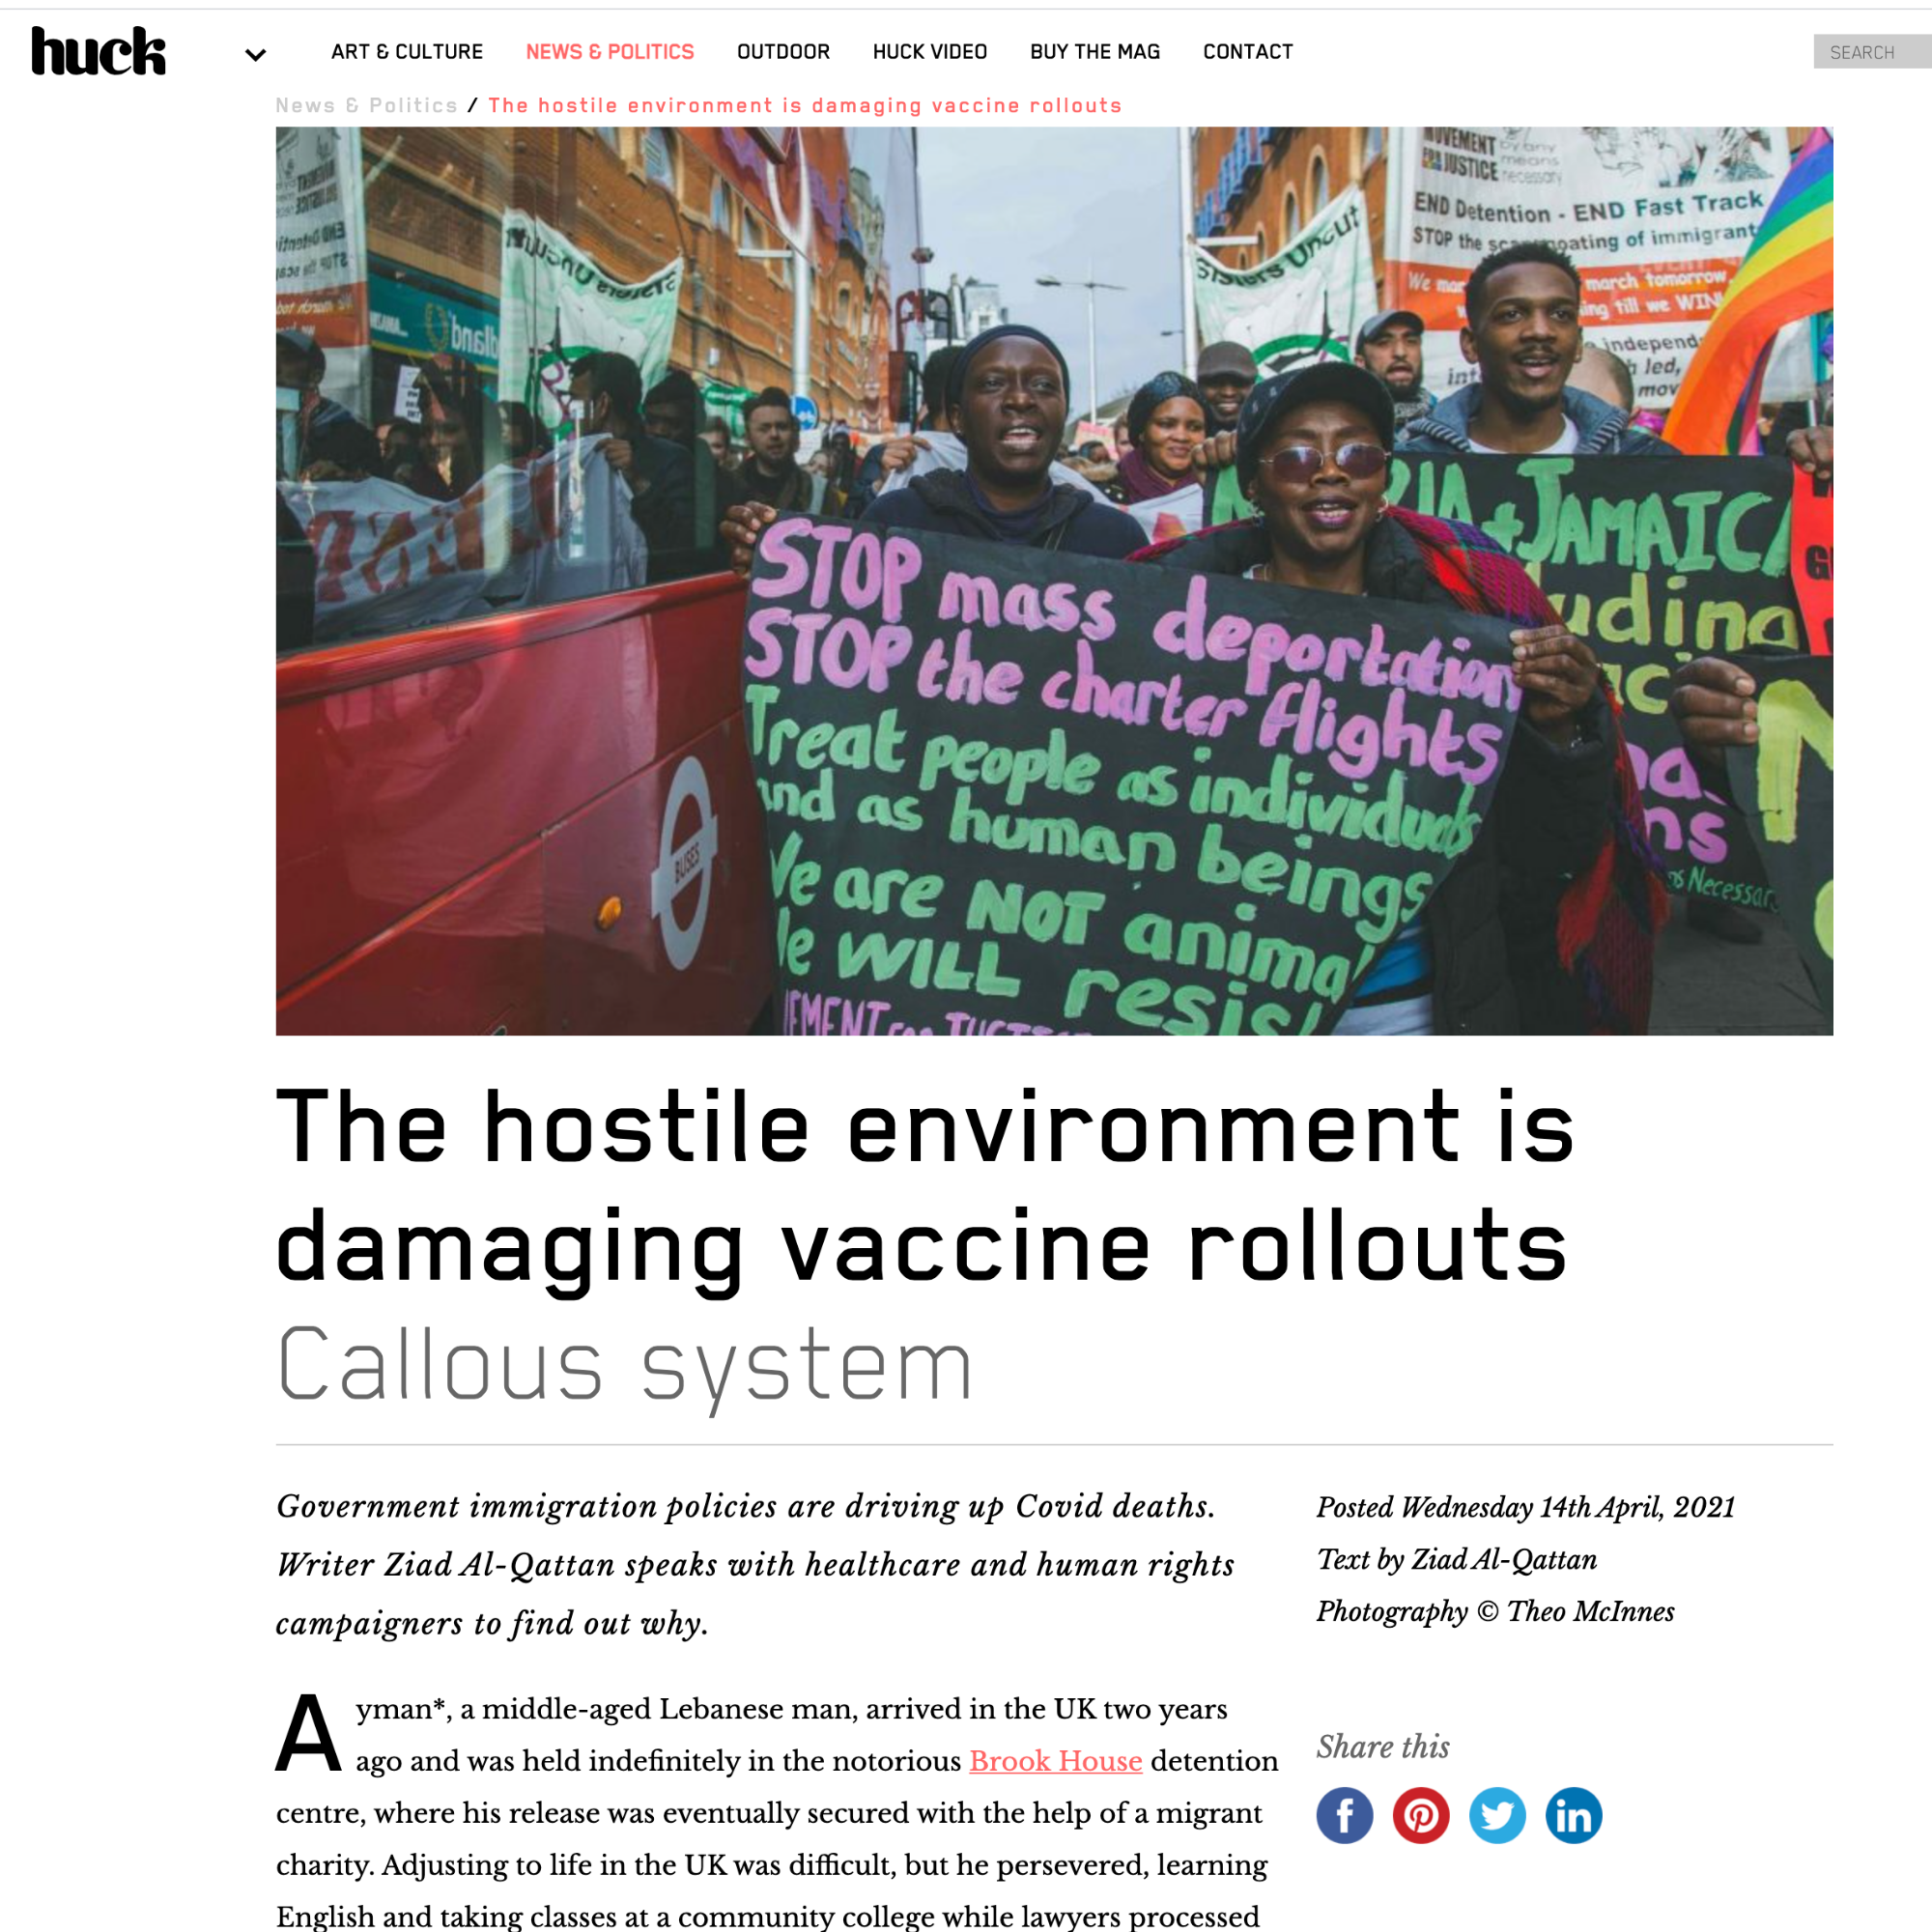 The hostile environment is damaging vaccine rollouts